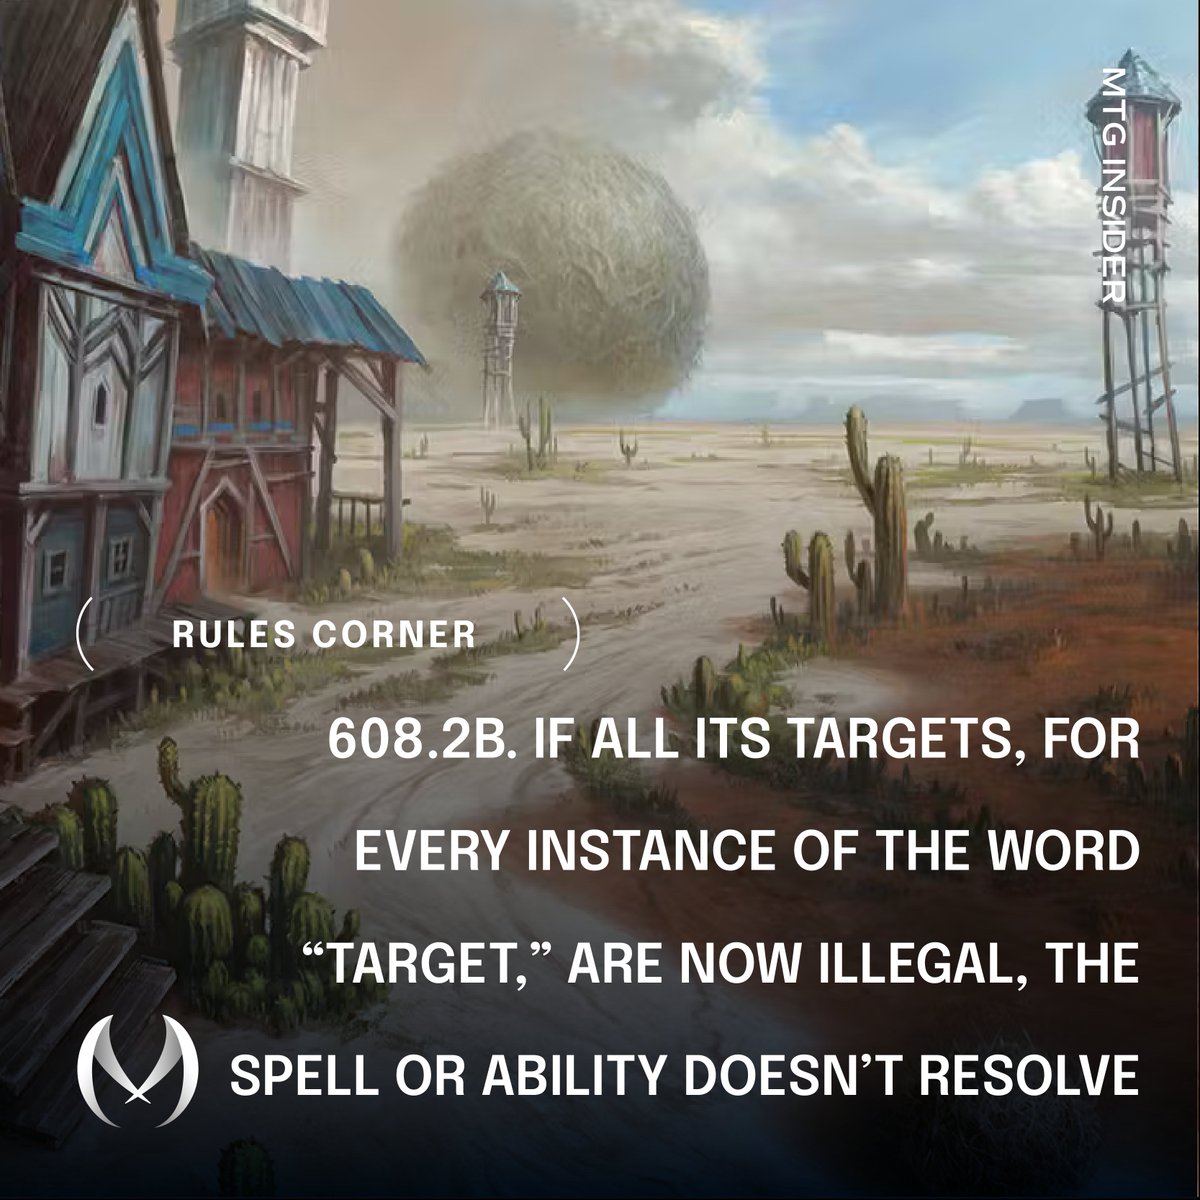 As long as one target remains legal, a spell will resolve #mtg #magicthegathering #mtgrules